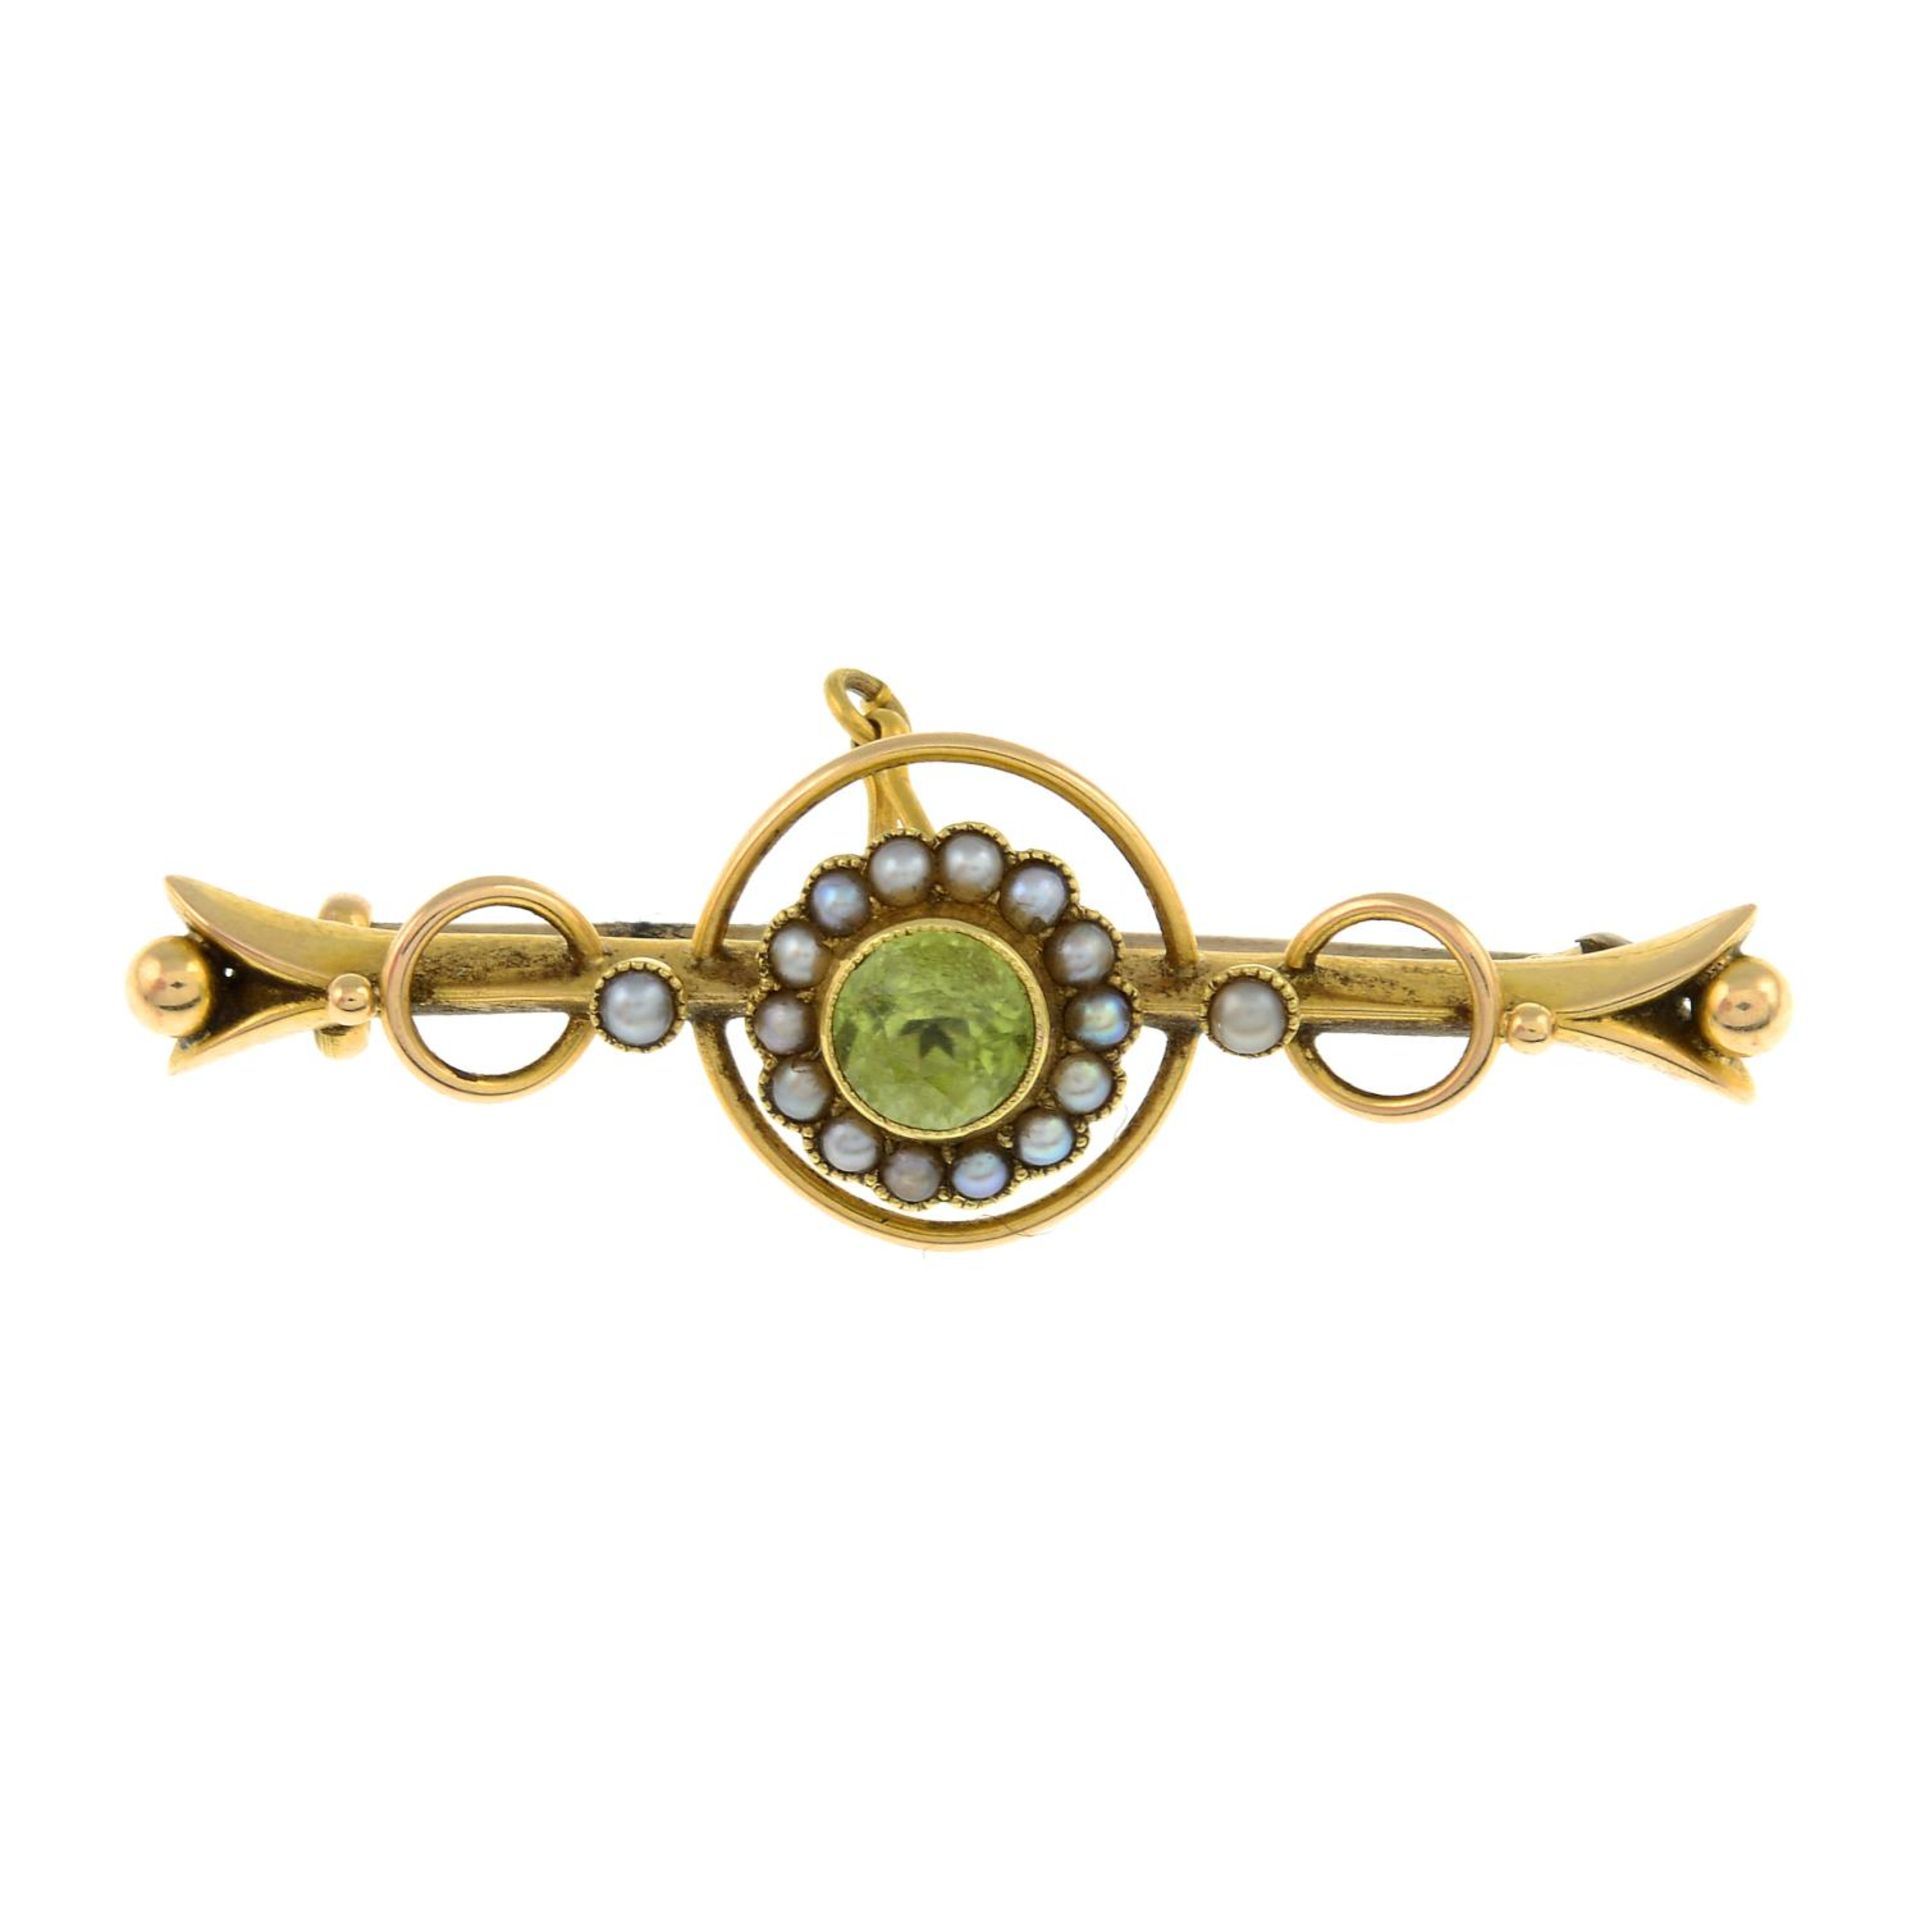 An early 20th century 15ct gold peridot and split pearl brooch.